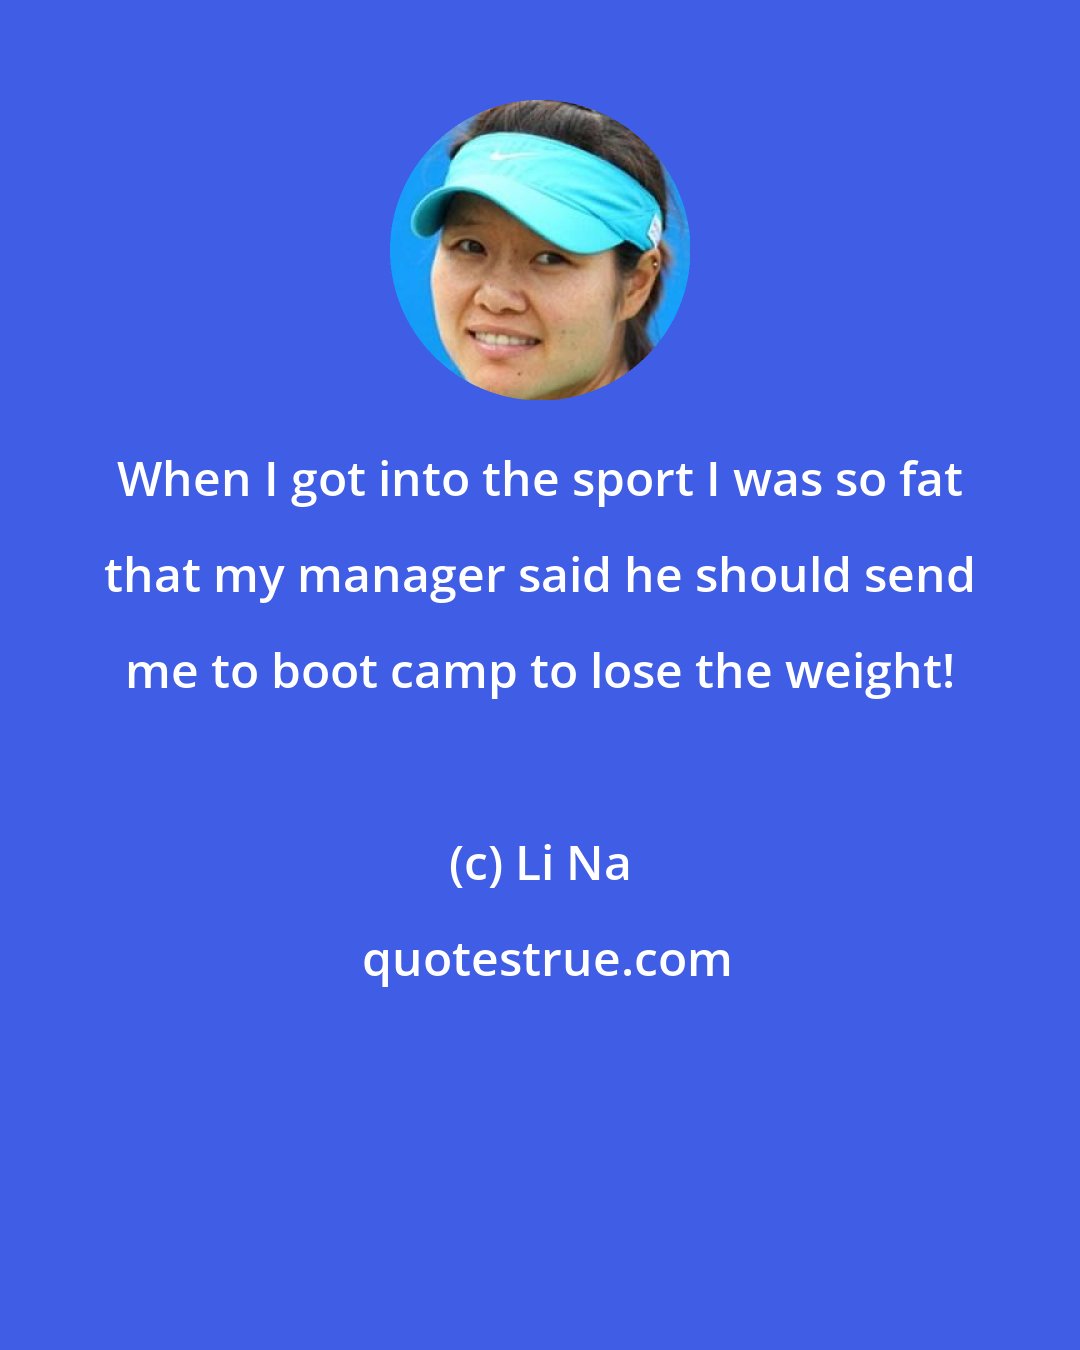 Li Na: When I got into the sport I was so fat that my manager said he should send me to boot camp to lose the weight!